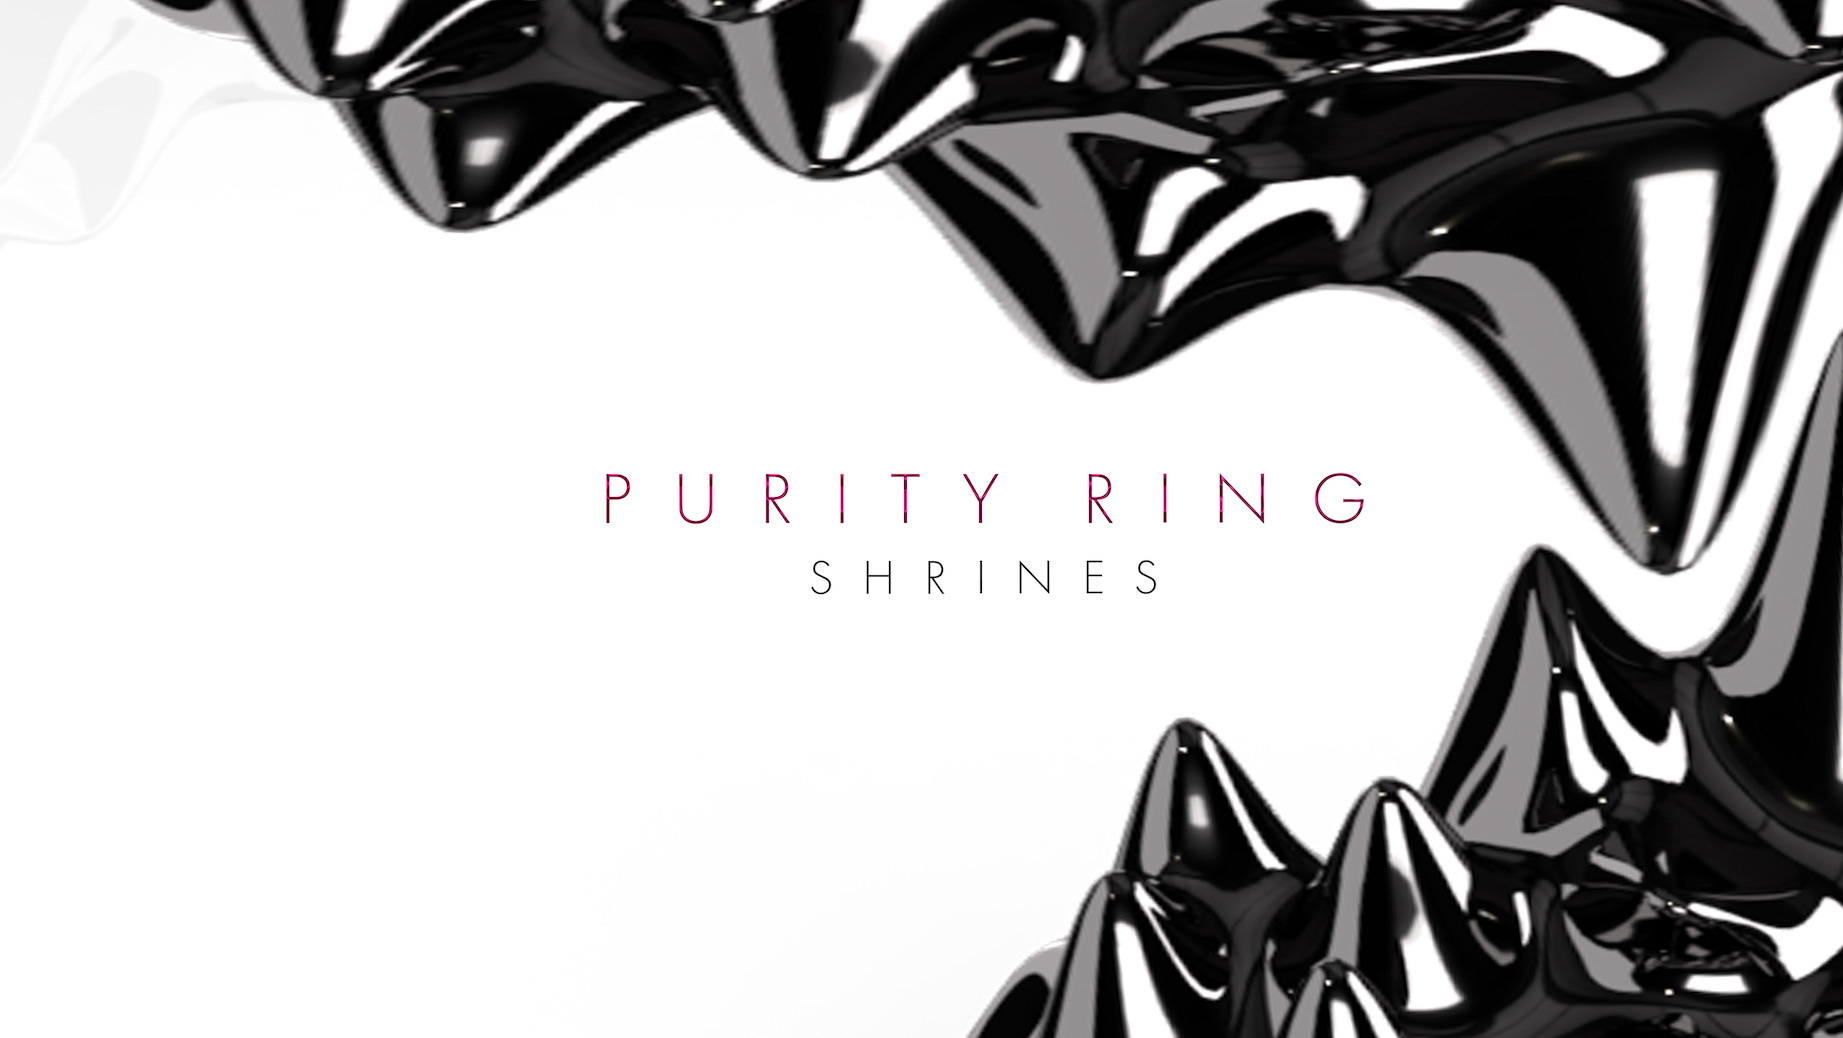 purity ring shrines